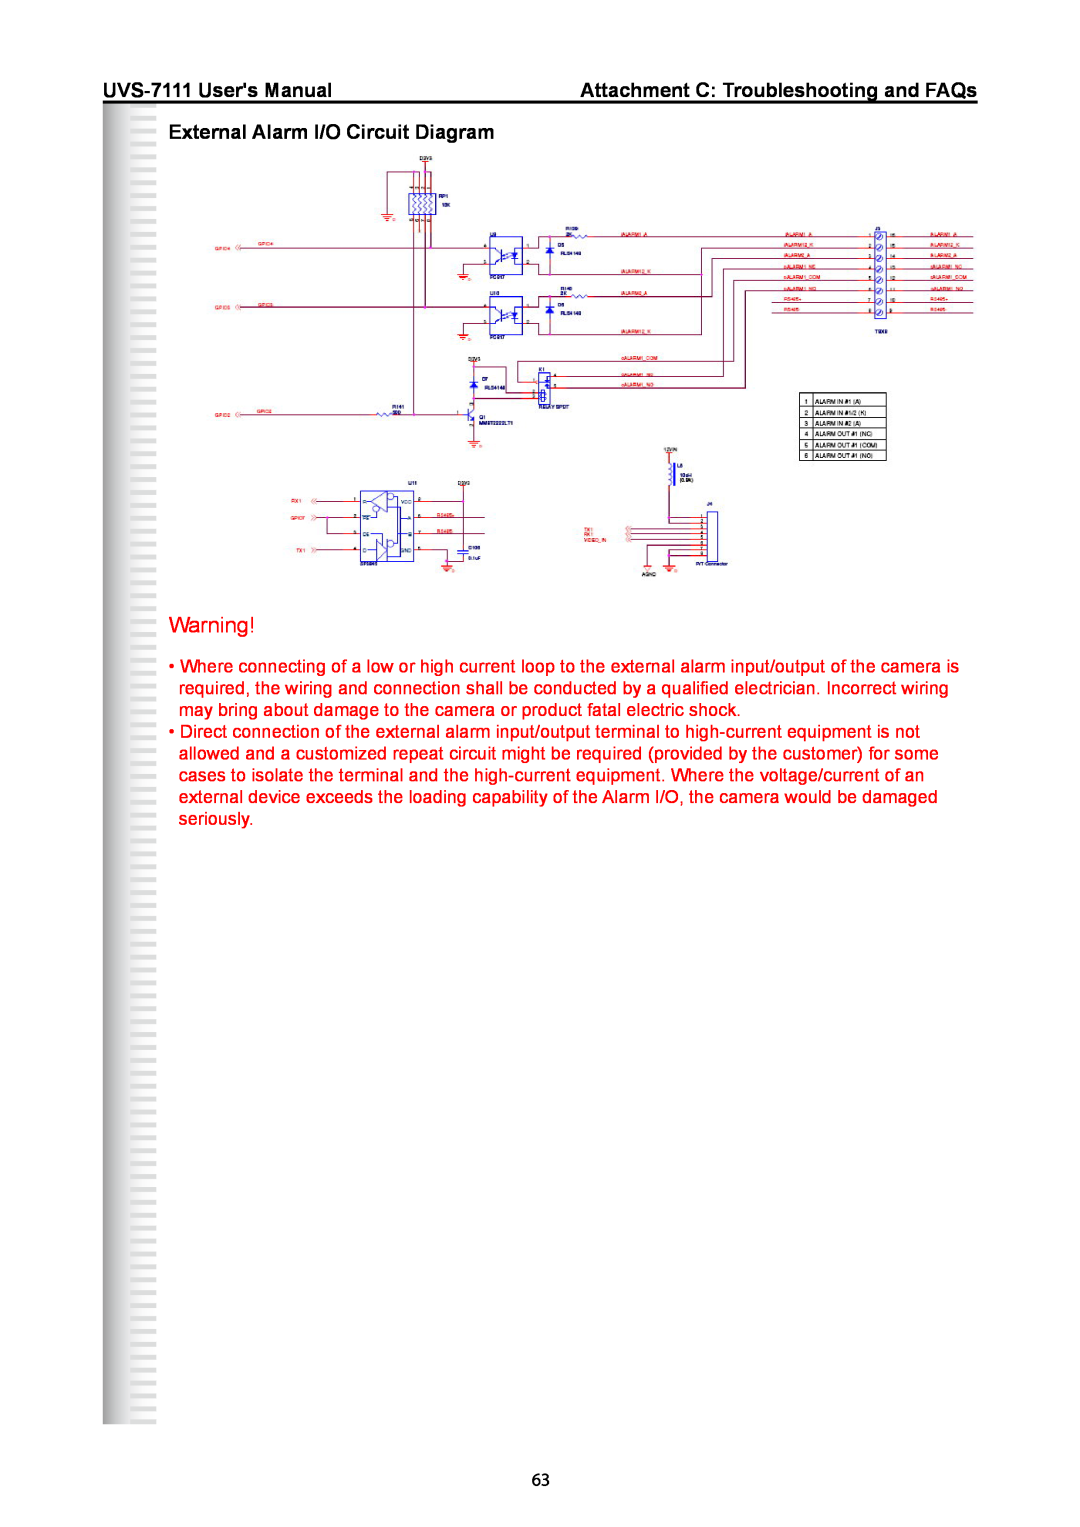 Active Thermal Management UVS-7111 manual Attachment C Troubleshooting and FAQs, External Alarm I/O Circuit Diagram 